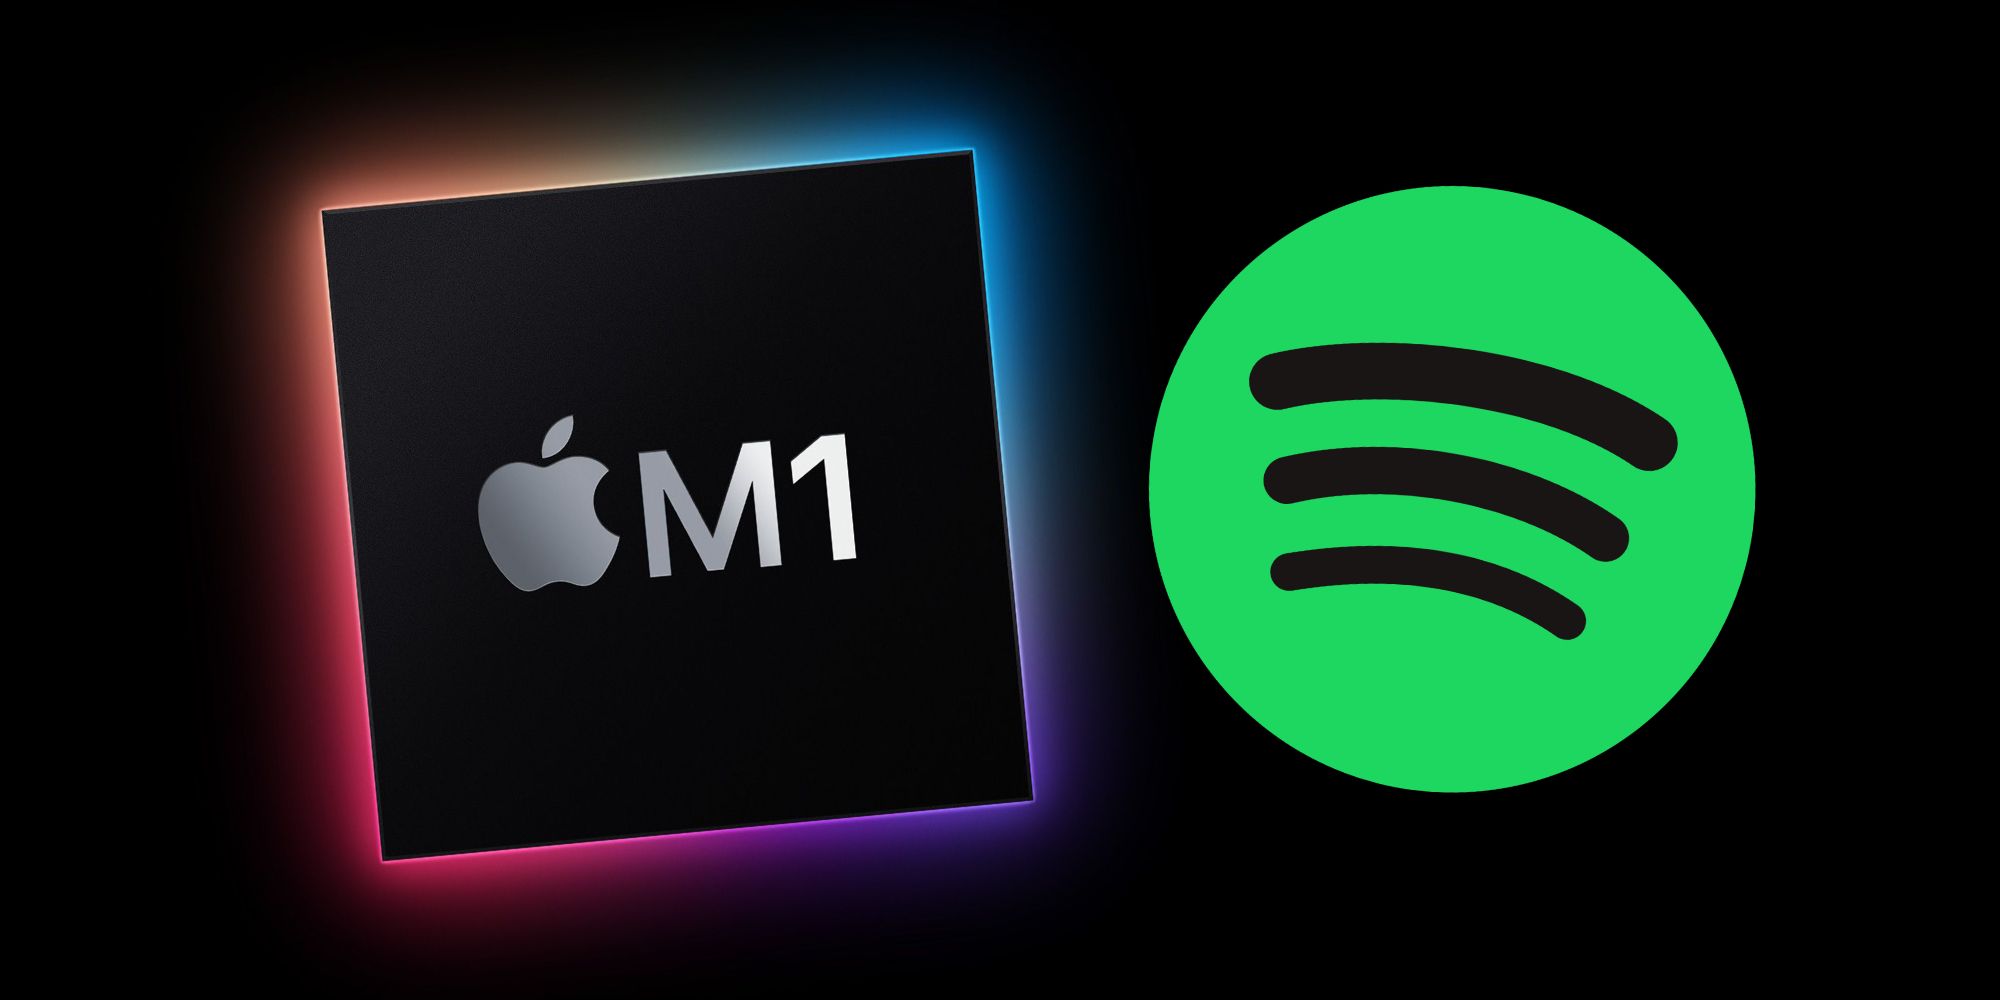 download spotify for mac full version